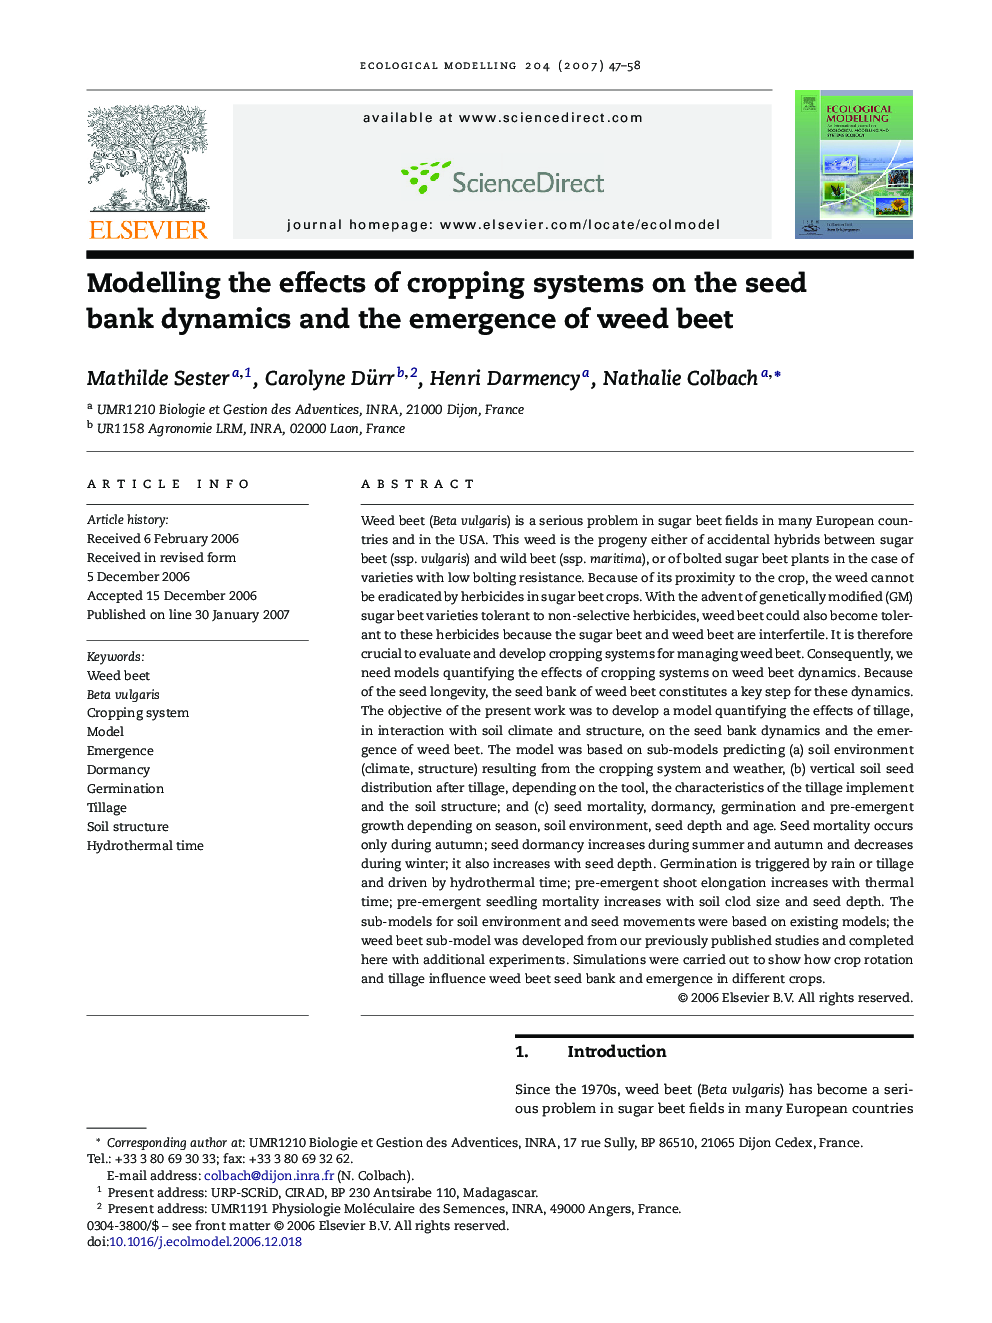 Modelling the effects of cropping systems on the seed bank dynamics and the emergence of weed beet